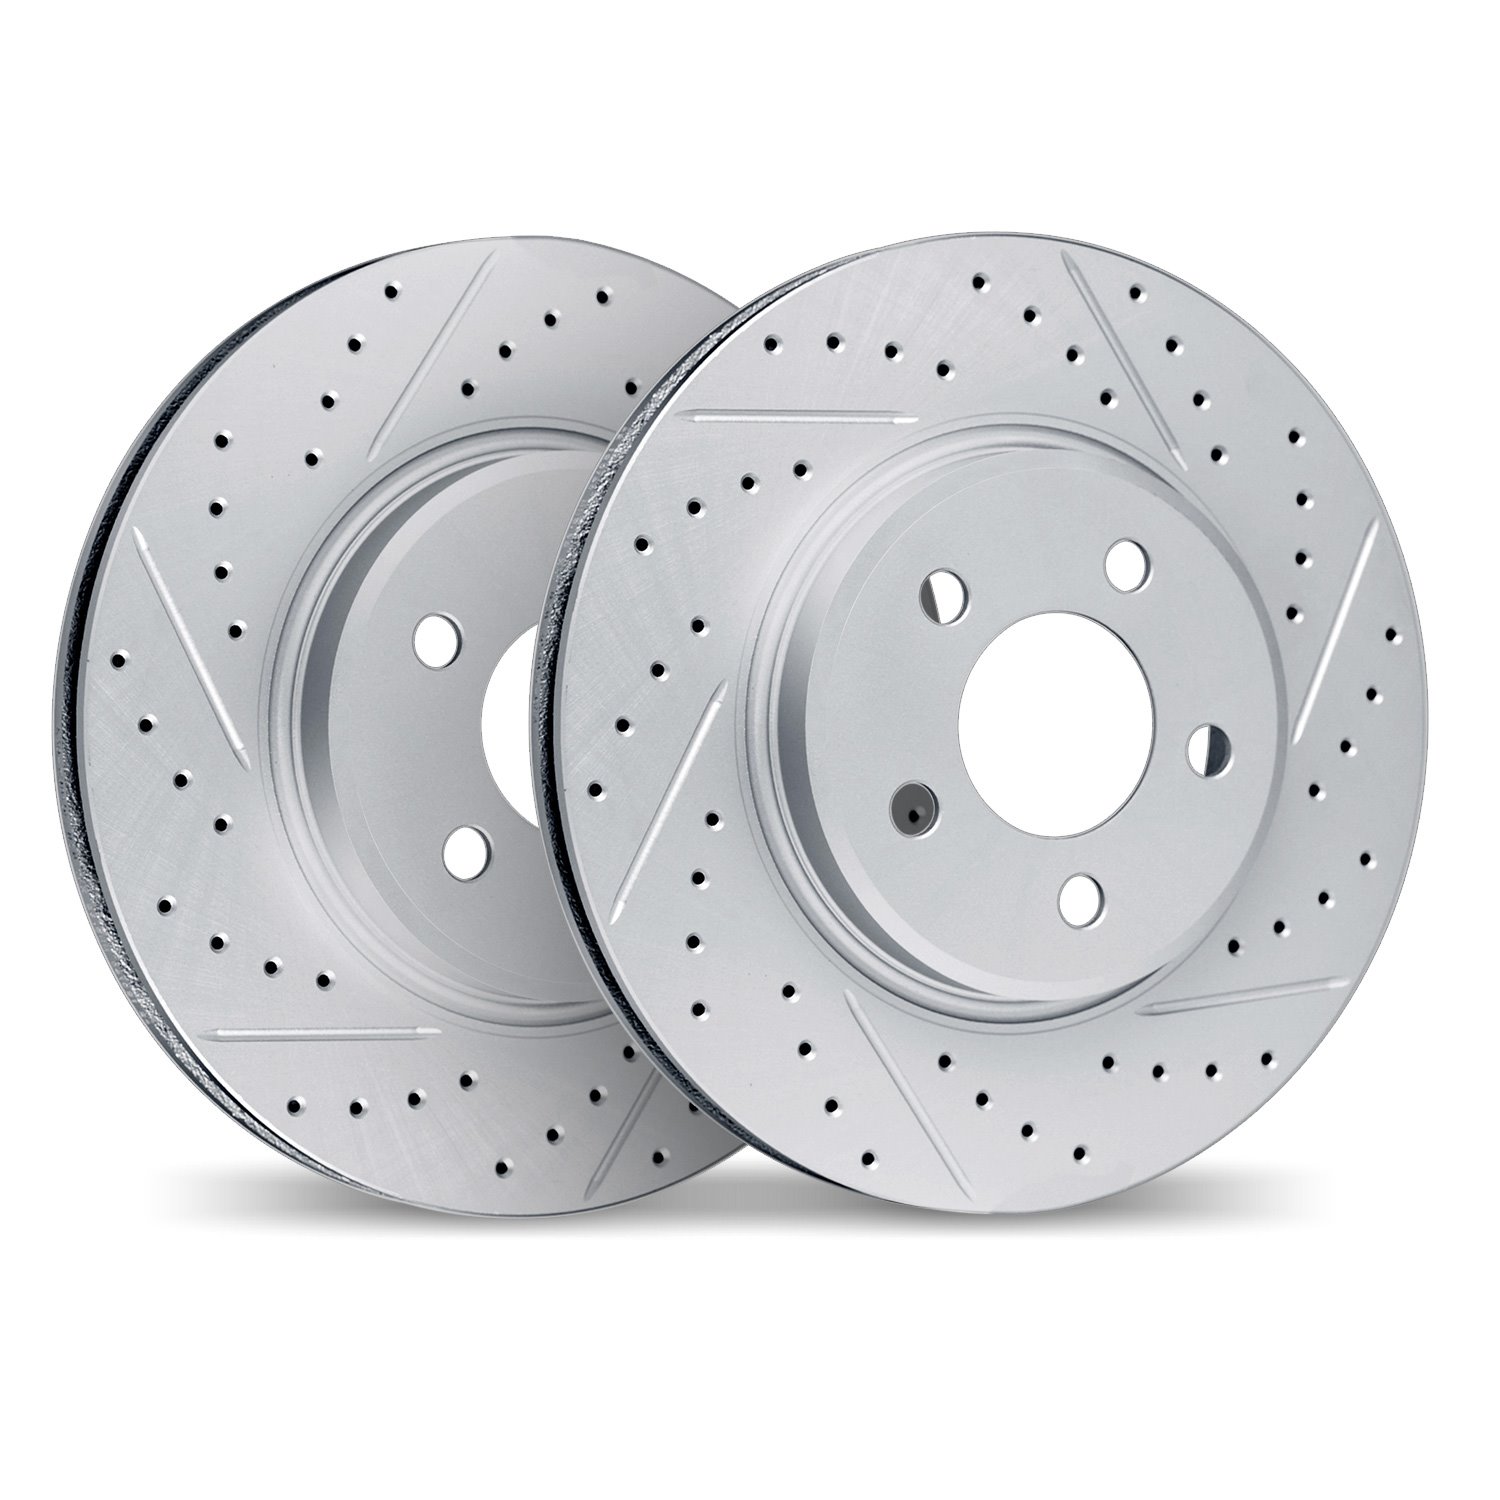 2002-11012 Geoperformance Drilled/Slotted Brake Rotors, 2006-2012 Land Rover, Position: Front